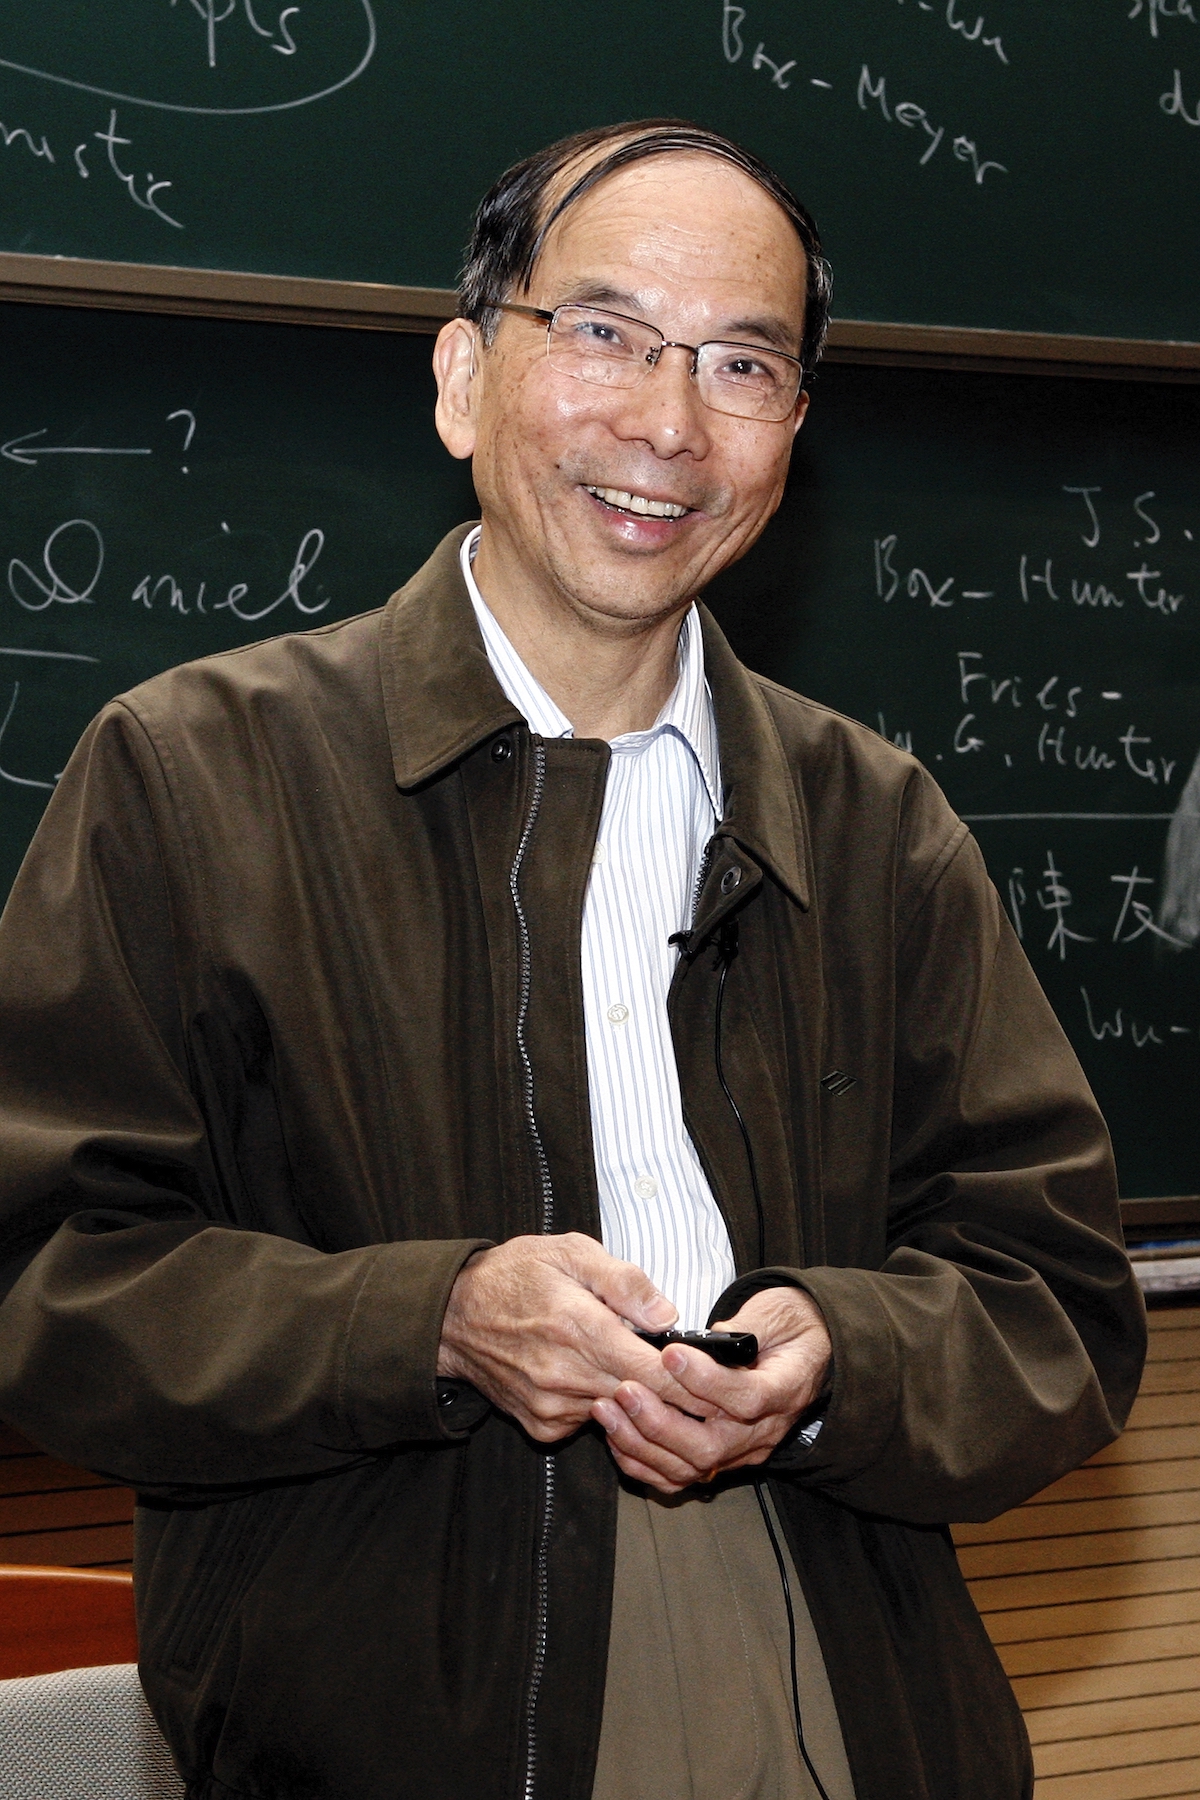 Professor Jeff Wu popularized the term “data science” which is now used worldwide.